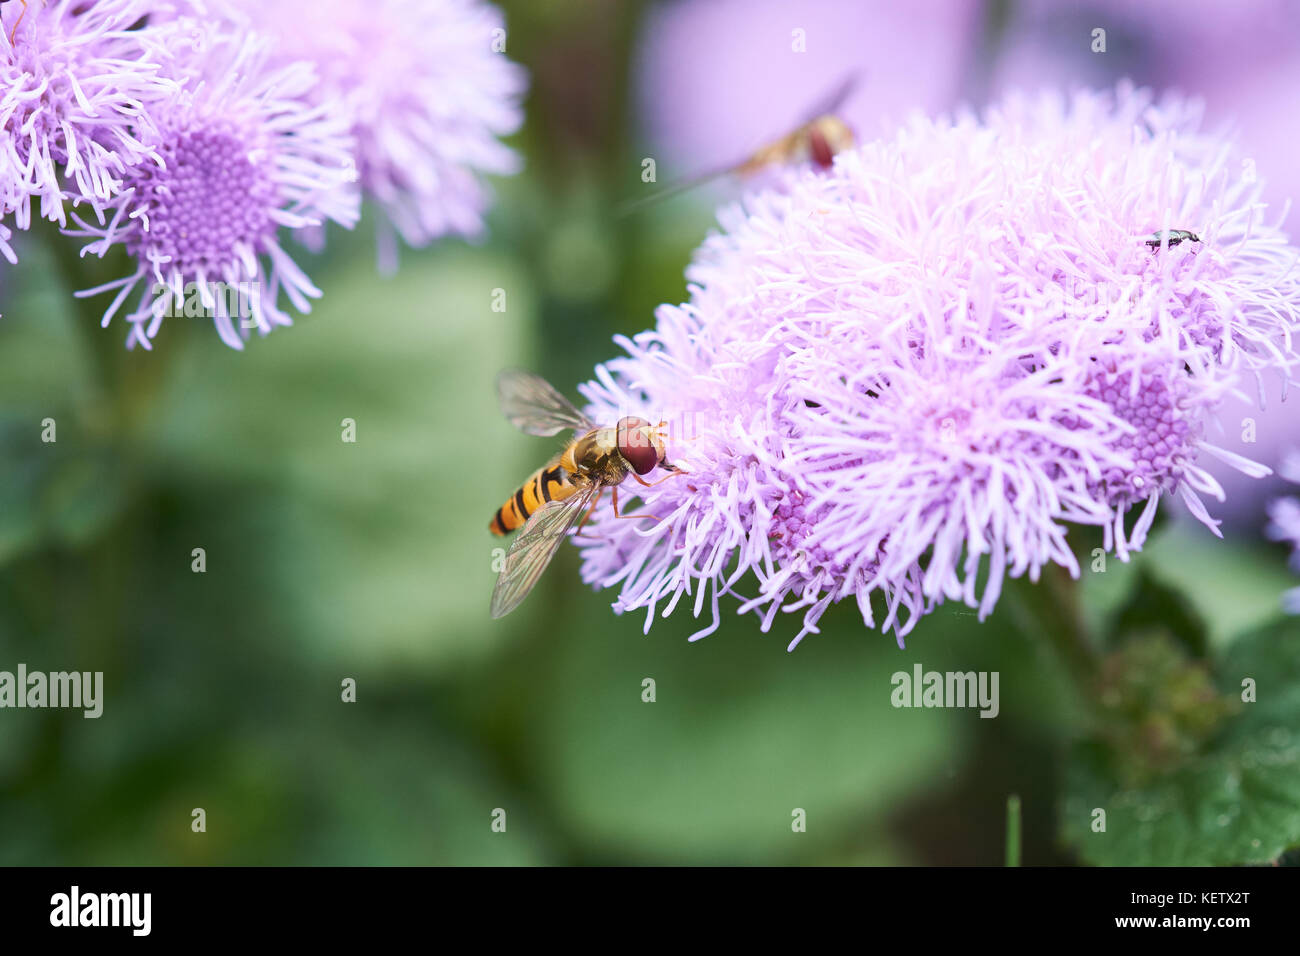 Common Hover-fly (Syrphus ribesii) feed on nectar from the summer purple flowers of an Ageratum (A. houstonianum Diamond Blue F1) garden plant, UK. Stock Photo